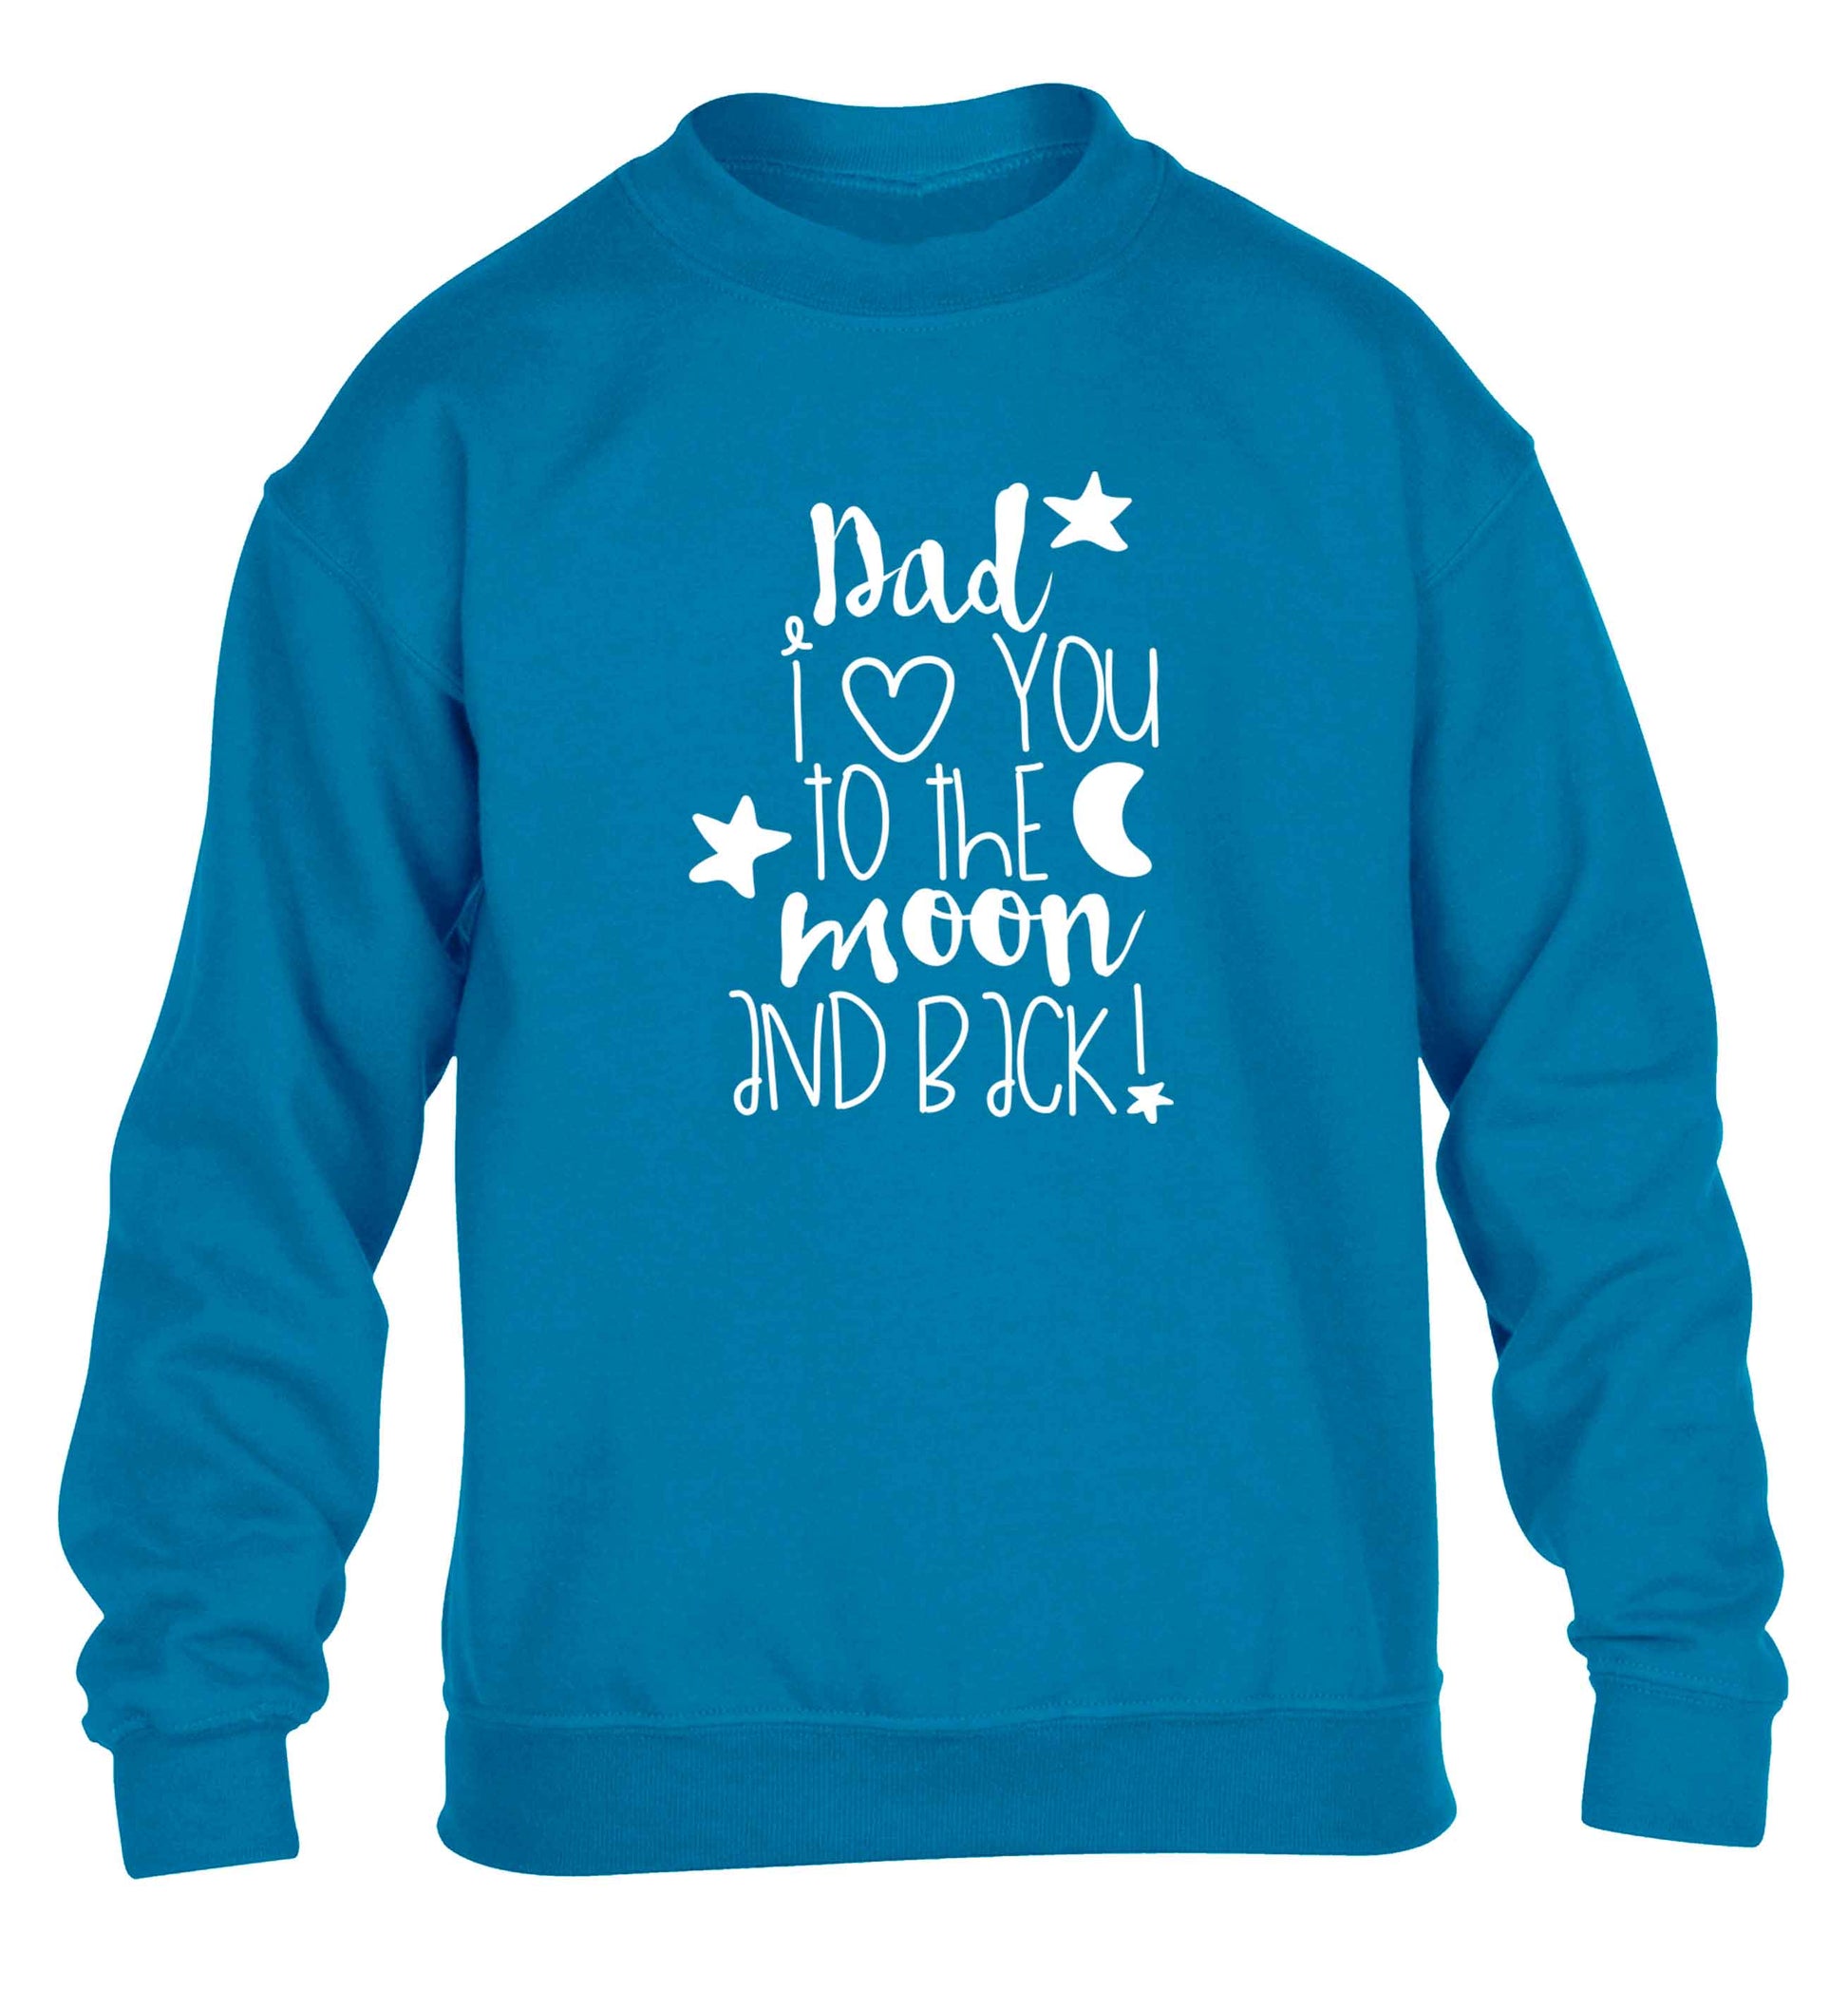 Dad I love you to the moon and back children's blue sweater 12-13 Years